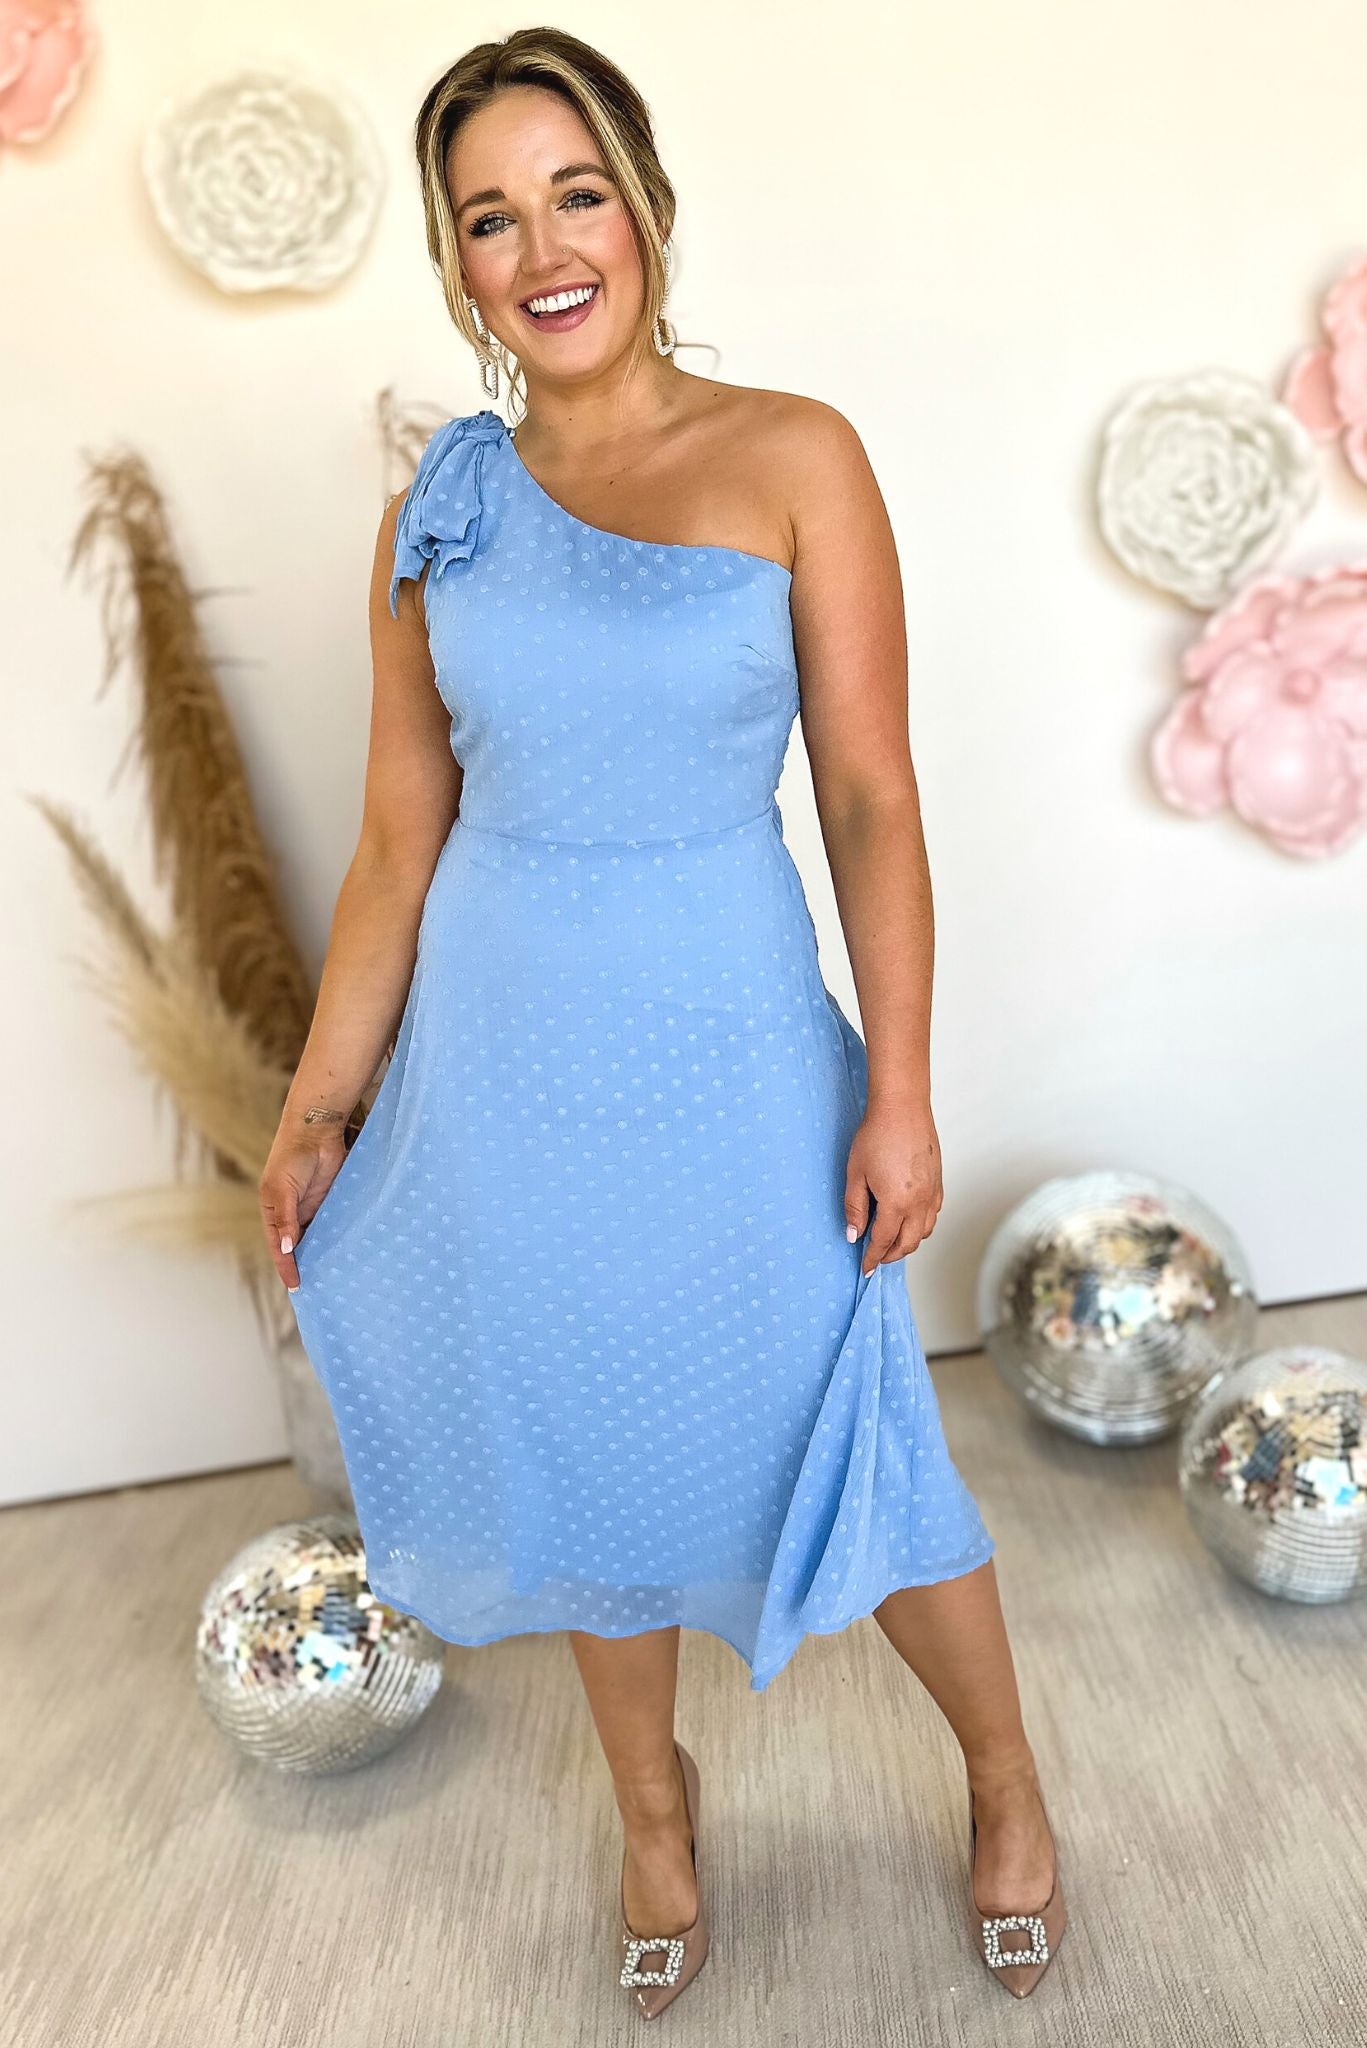 Load image into Gallery viewer, Light Blue Chiffon Swiss Dot One Shoulder Midi Dress, one shoulder, garden party, bow tie detail, swiss dot detail, must have, shop style your senses by mallory fitzsimmons
